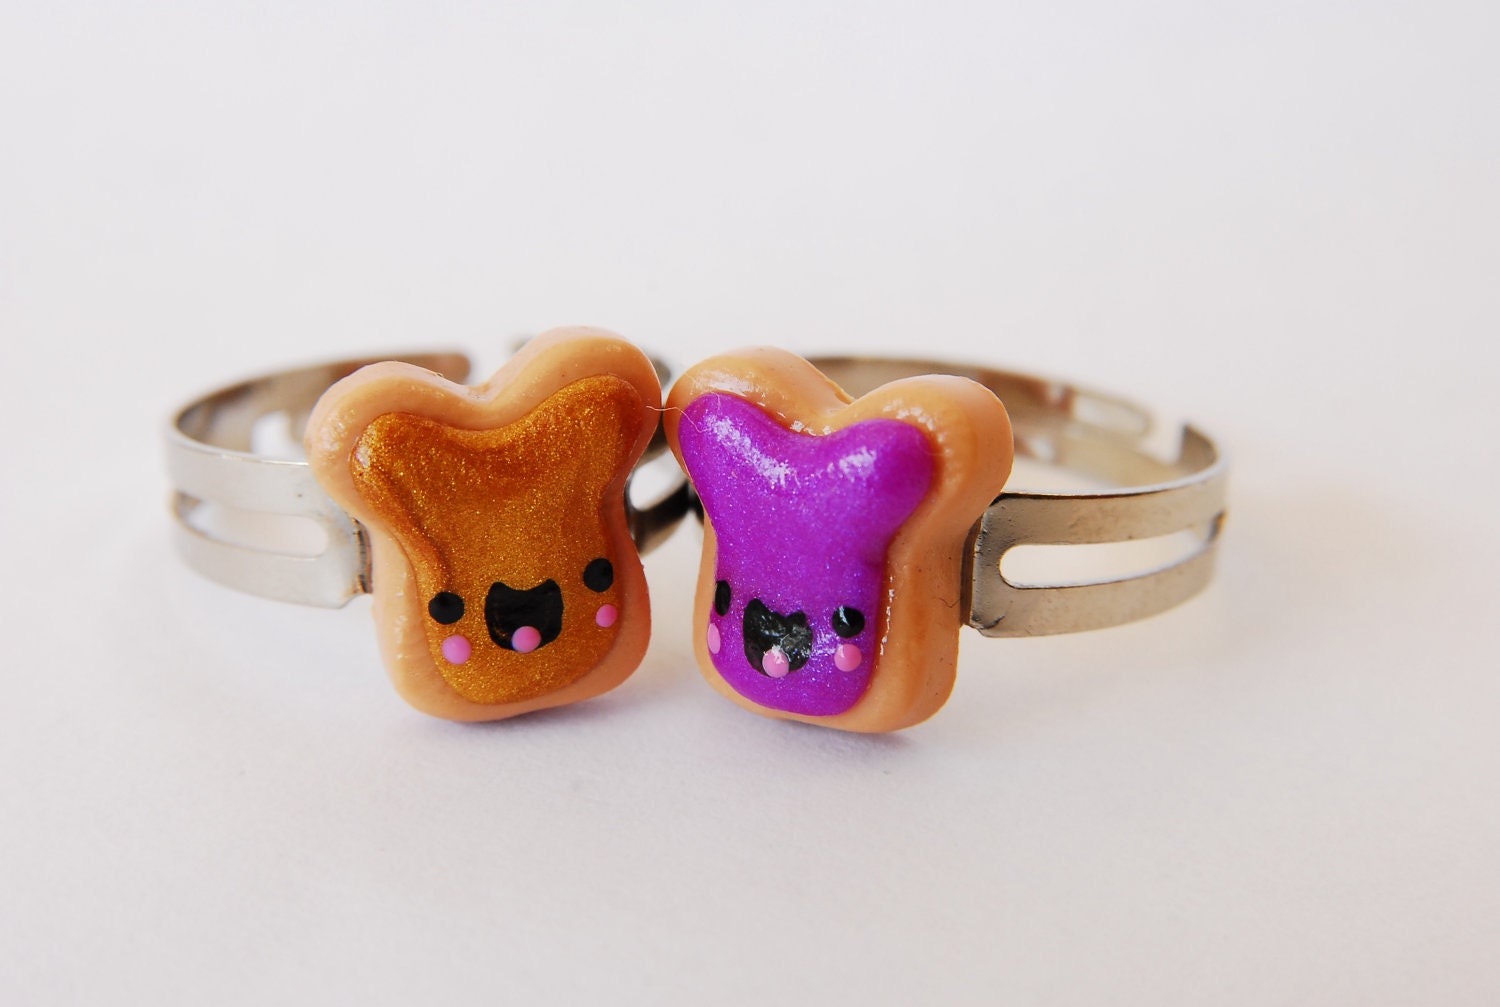 Friendship Rings on Peanutbutter And Jelly Friendship Rings By Allisadornments On Etsy